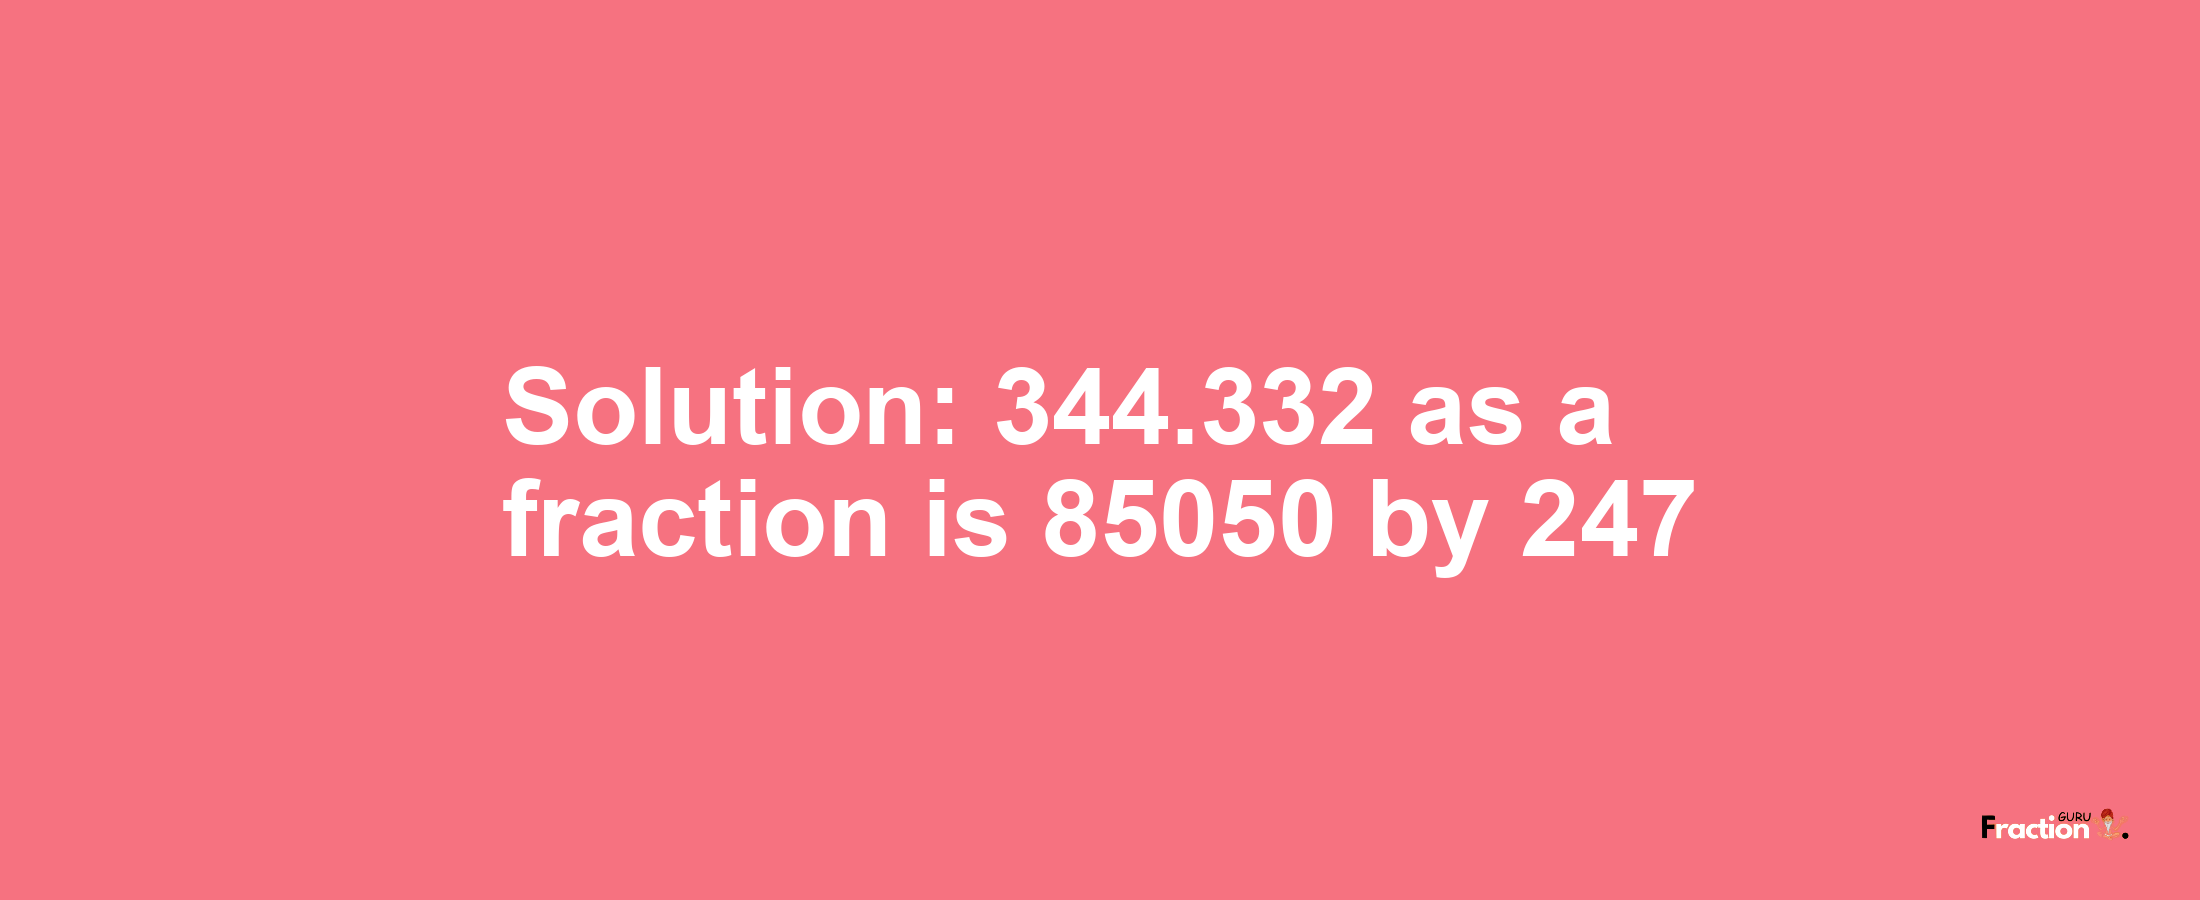 Solution:344.332 as a fraction is 85050/247